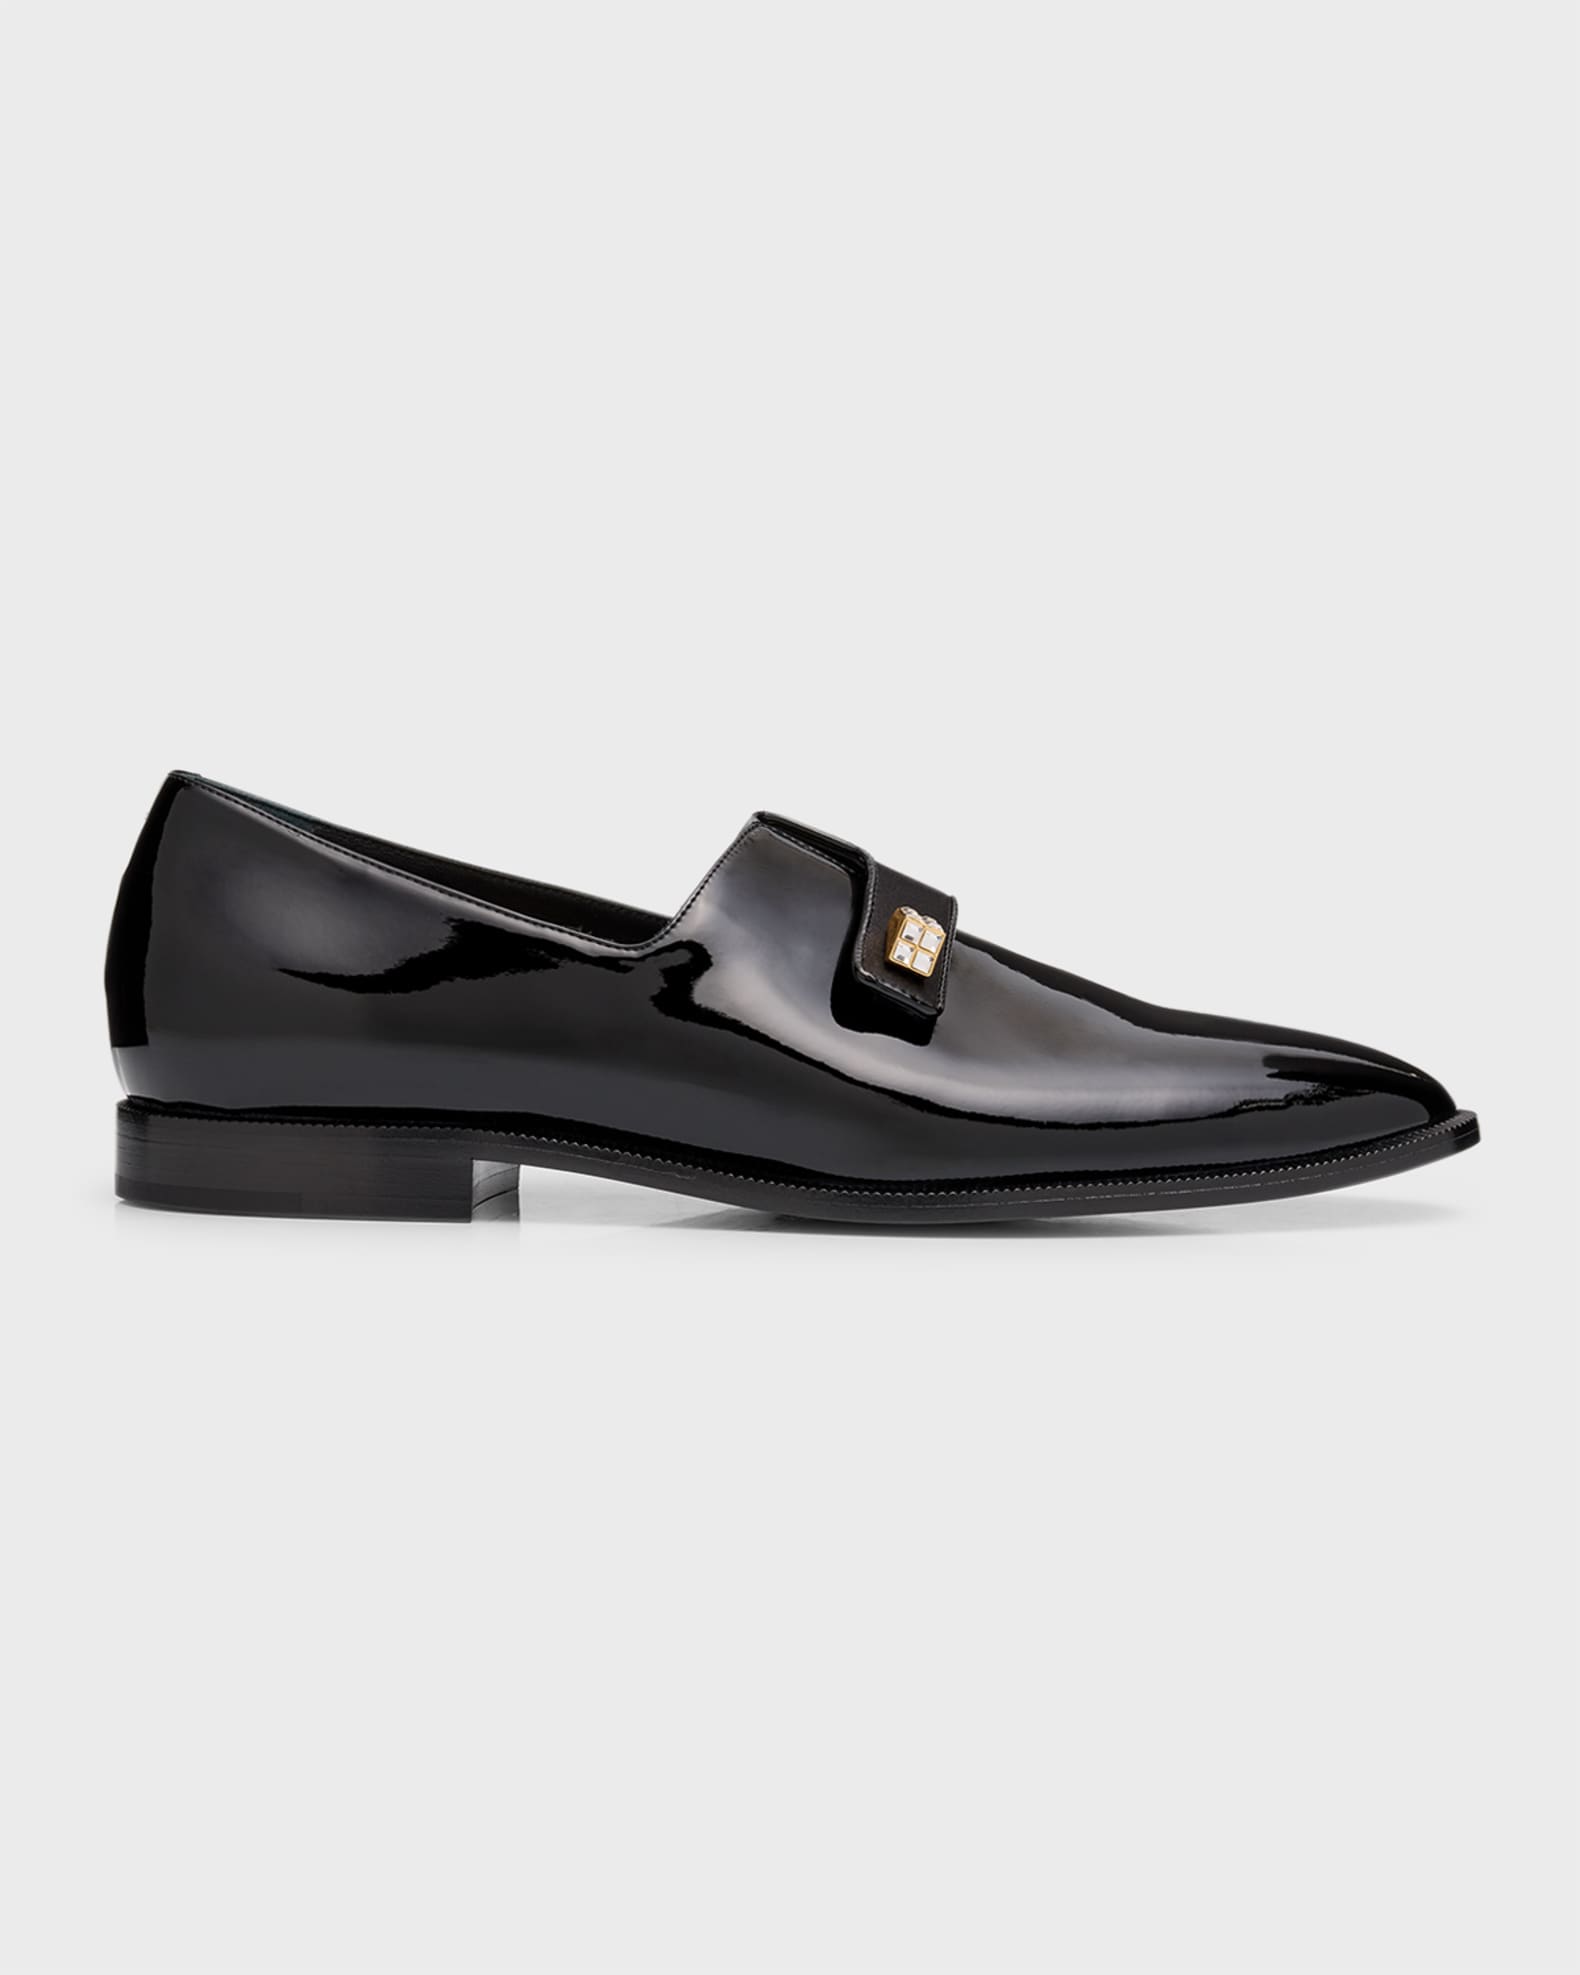 Giuseppe Zanotti Men's Marty Patent Leather Penny Loafers | Neiman Marcus